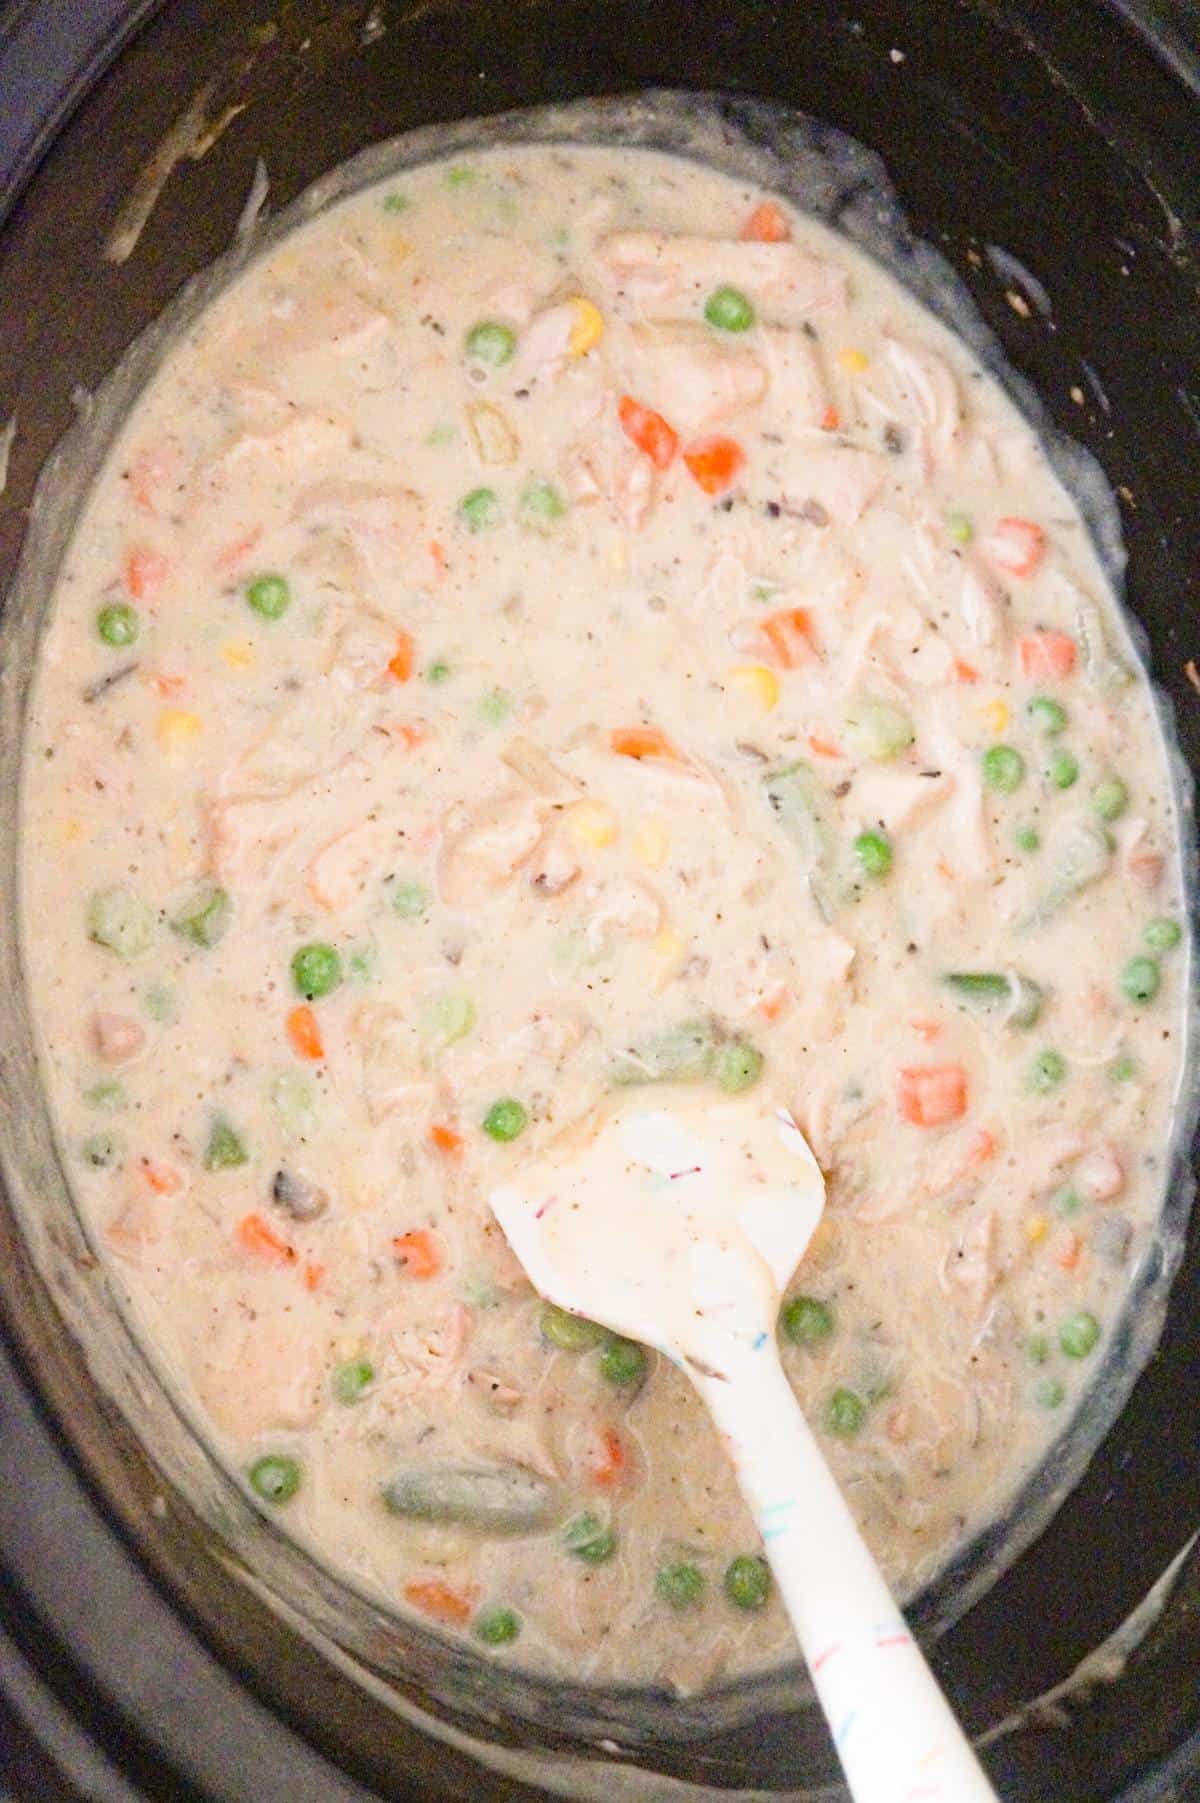 creamy chicken and vegetable mixture being stirred in a crock pot